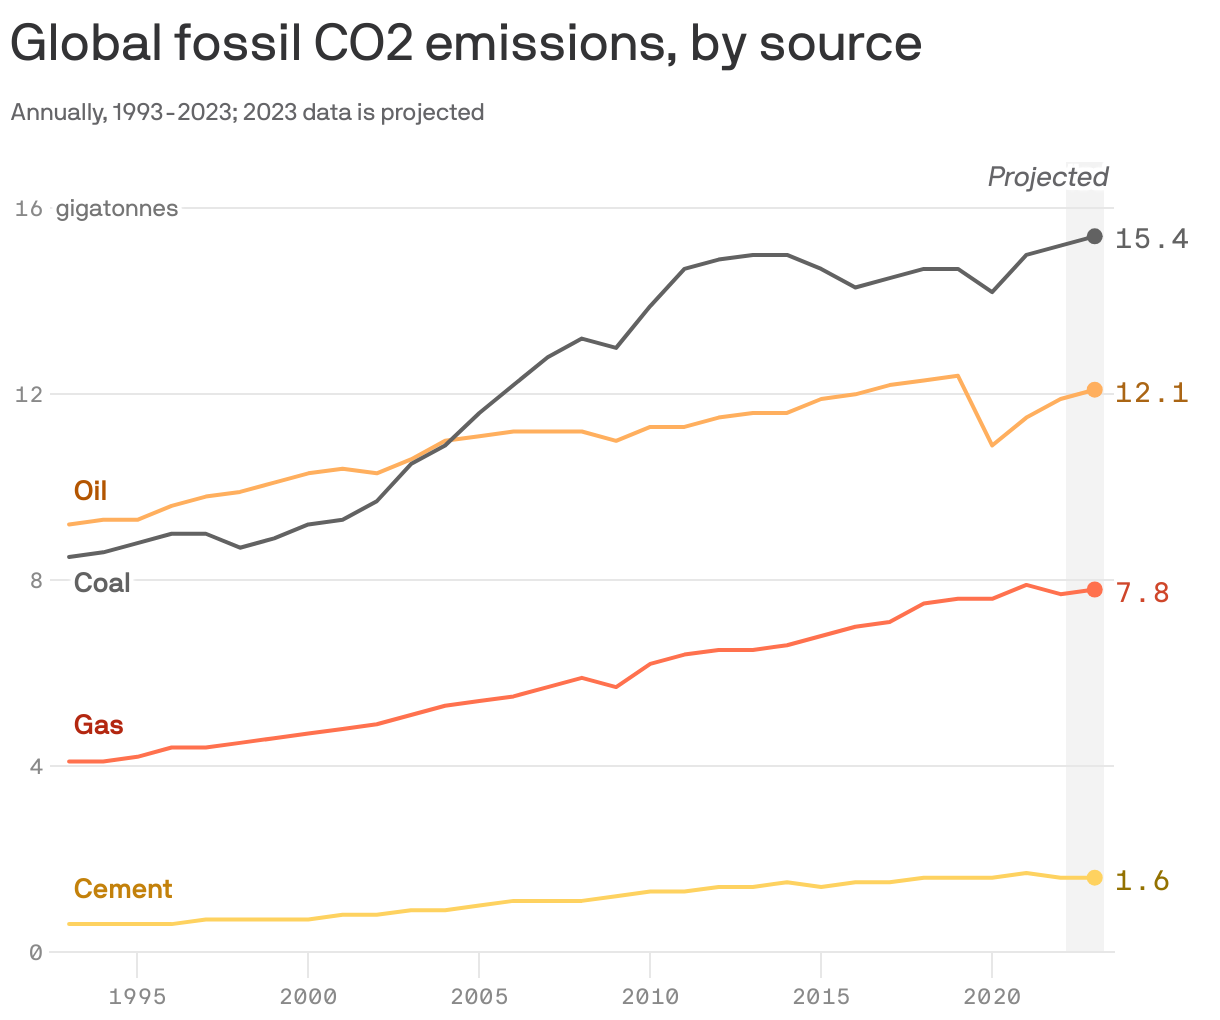 Global fossil CO2 emissions, by source